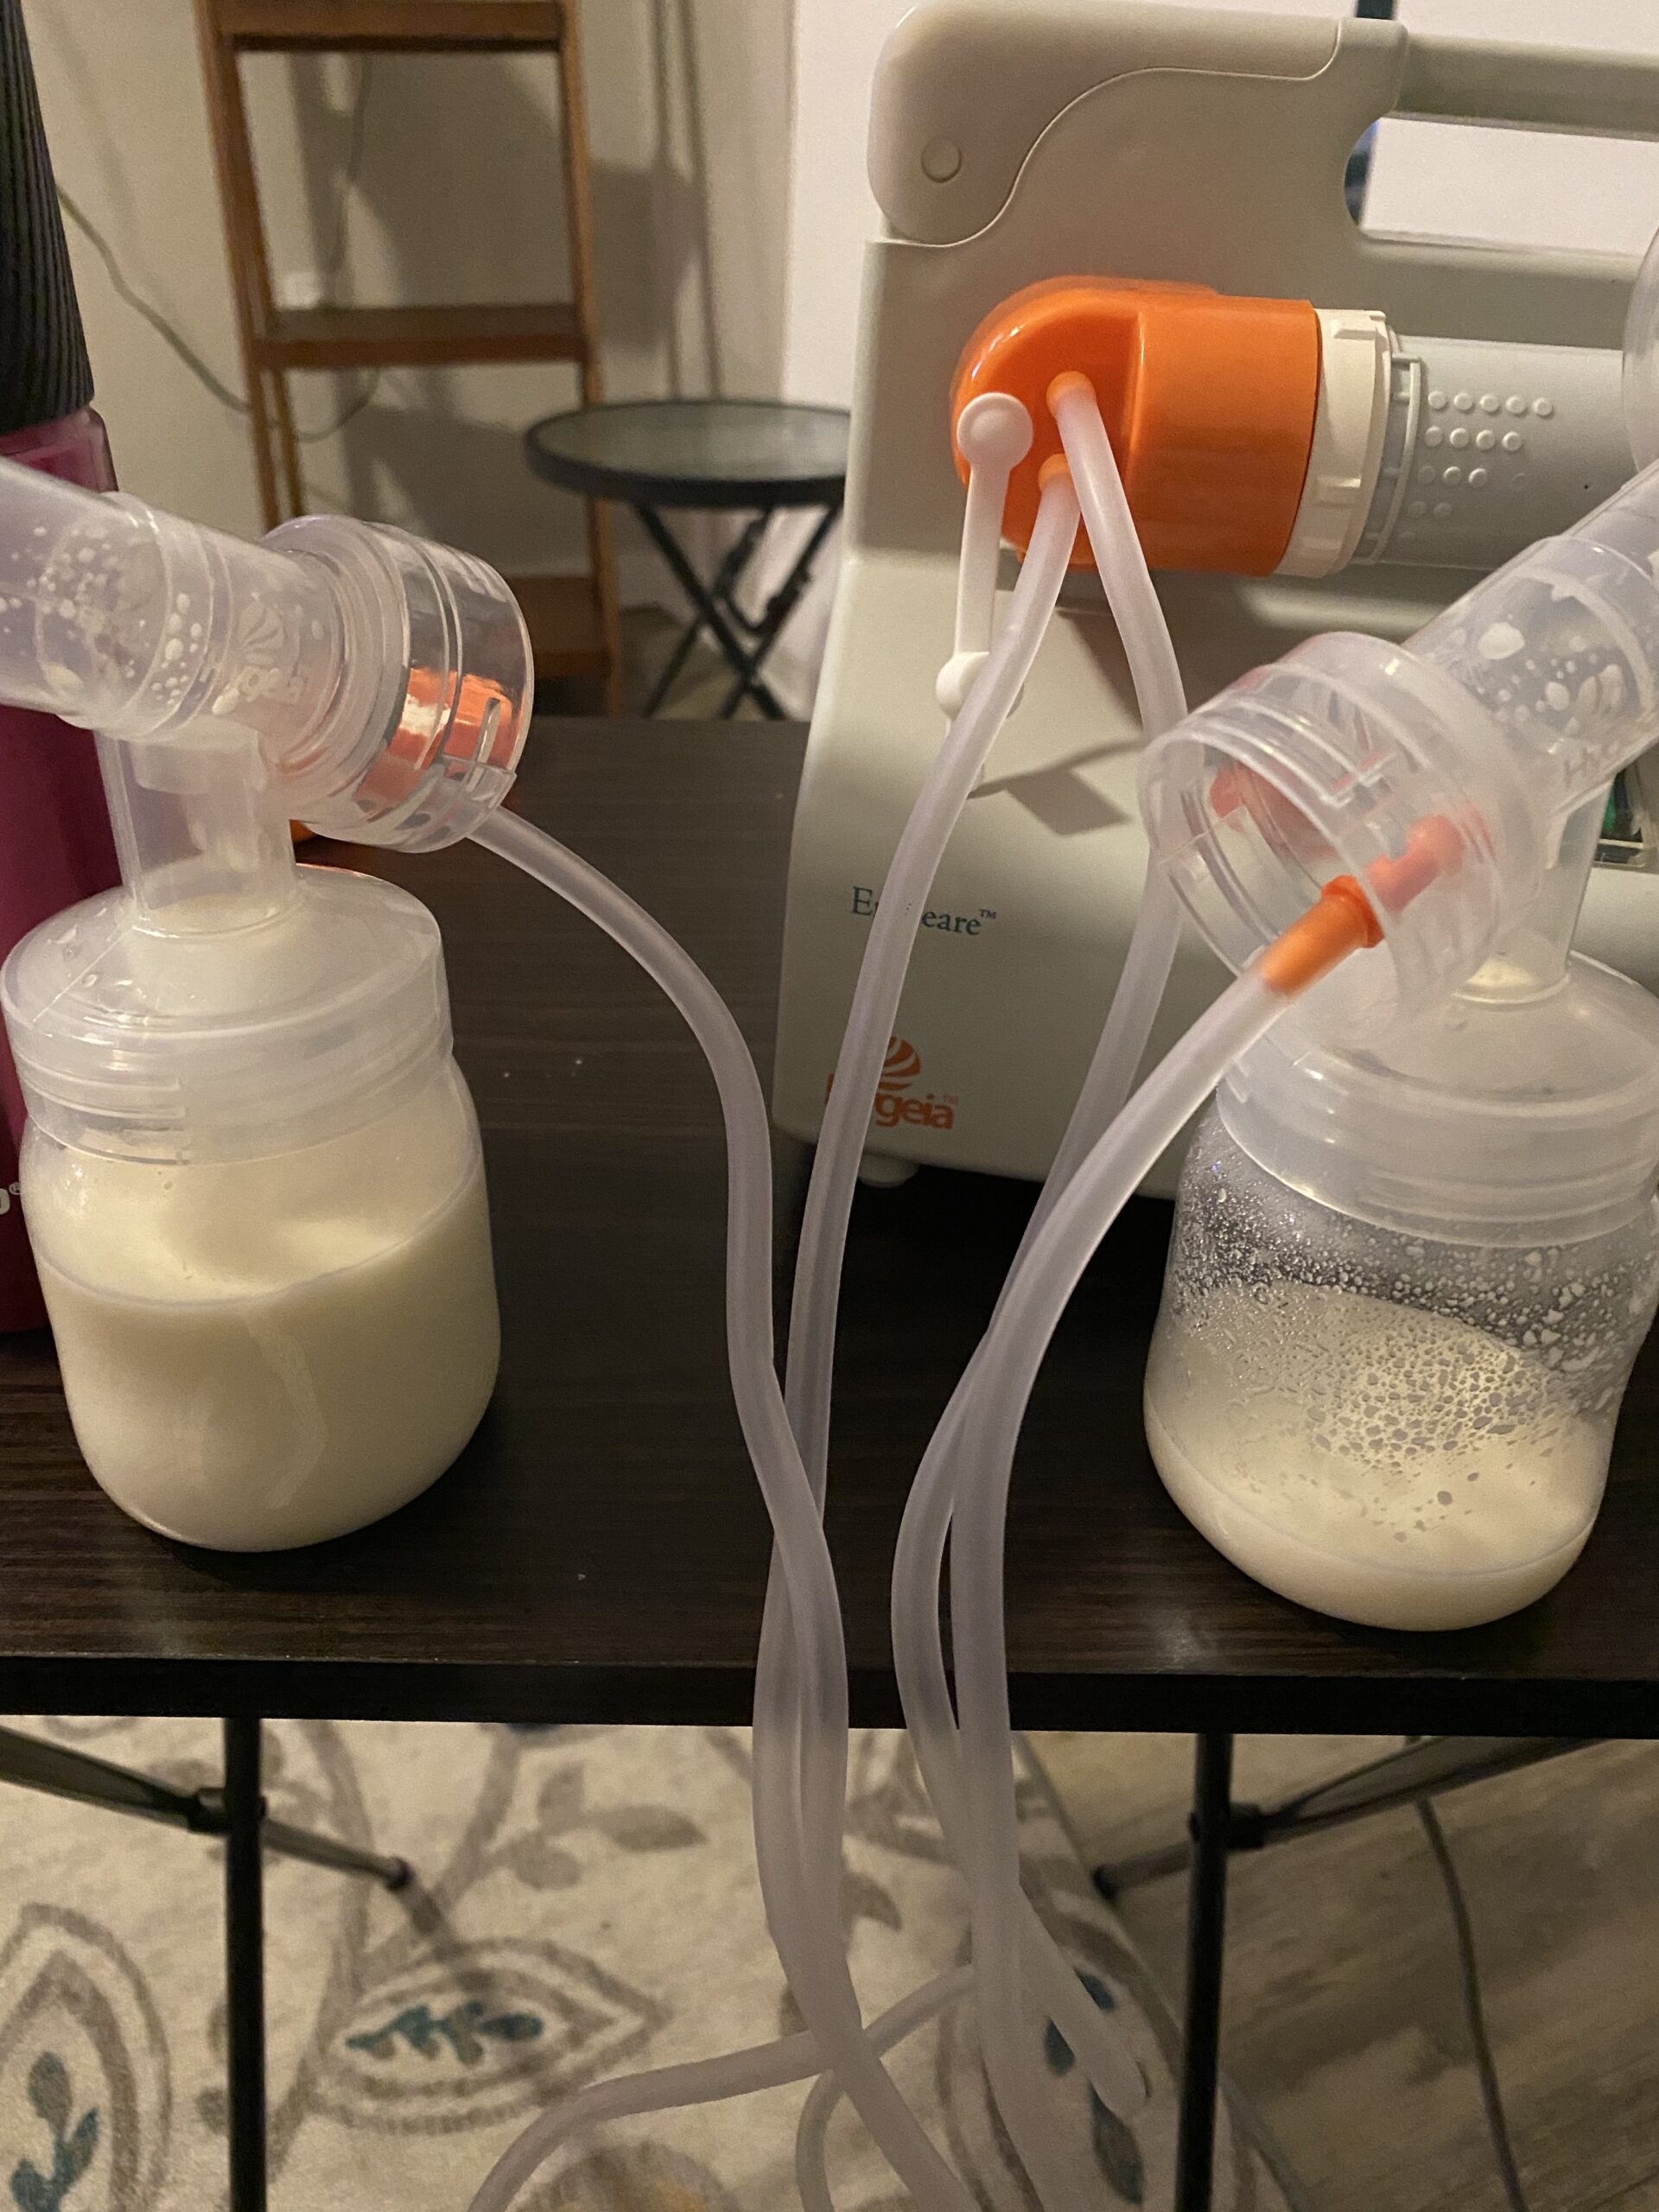 Choosing the best breast pump for you